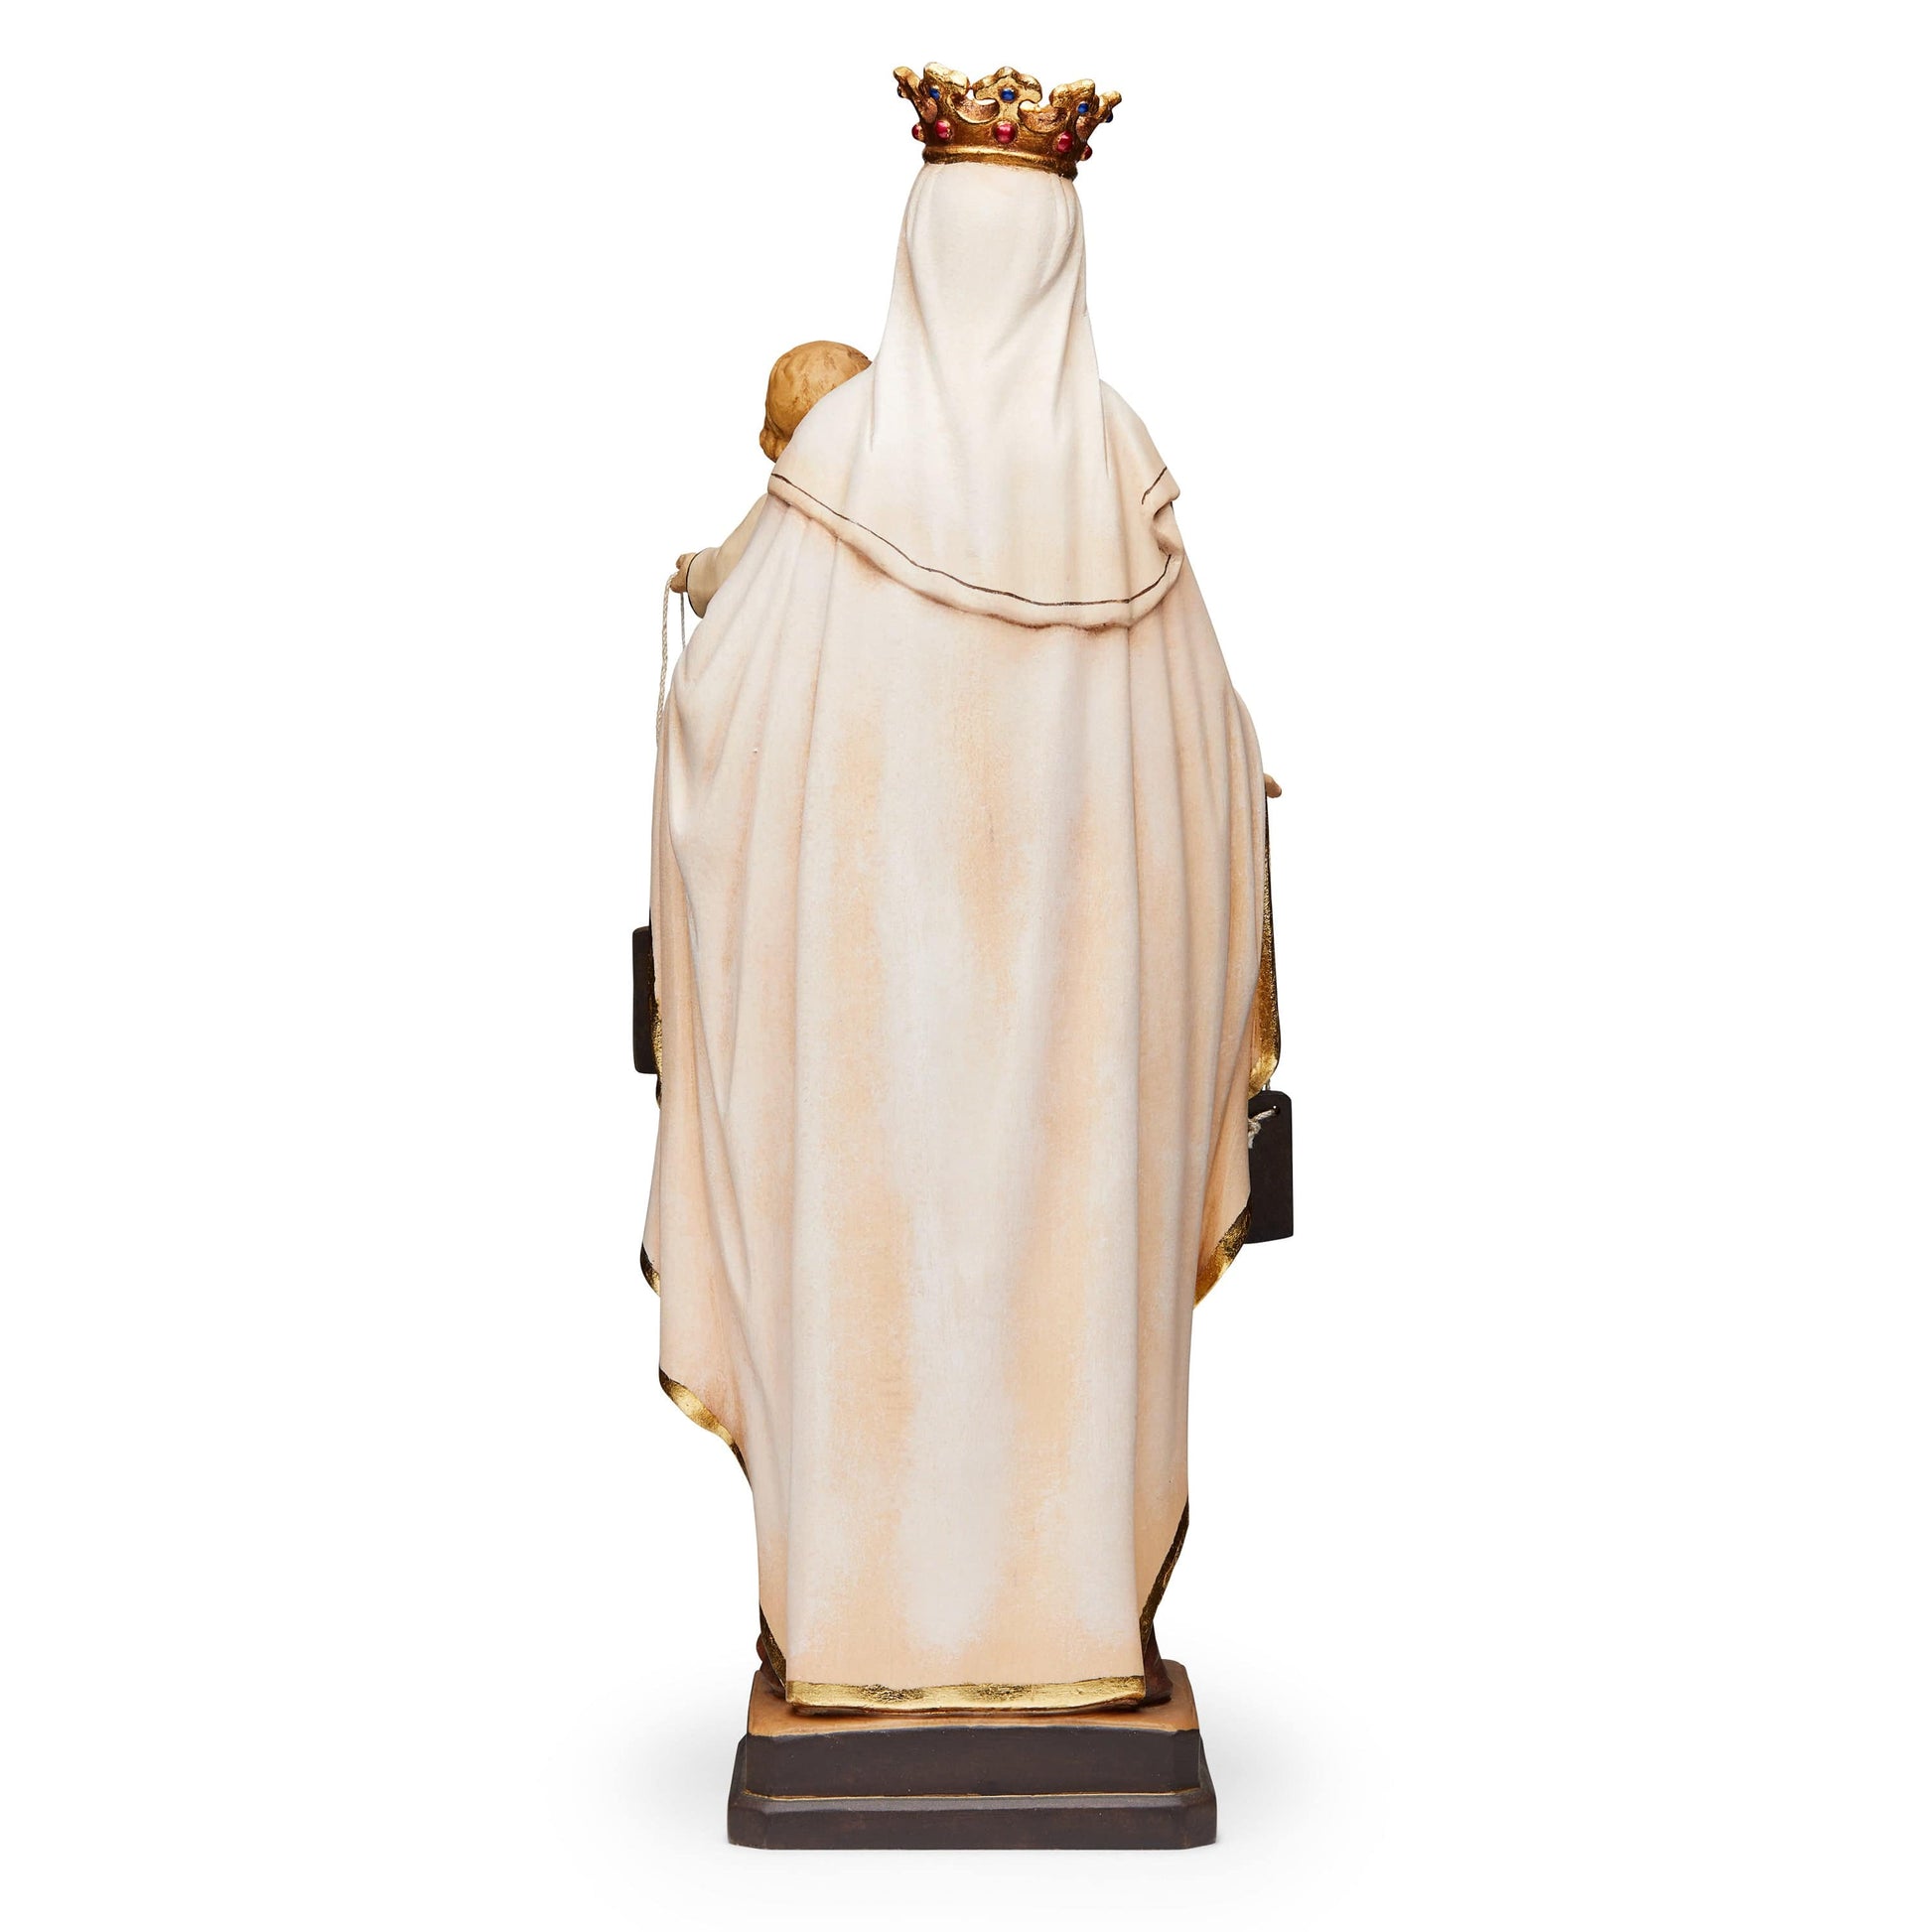 PEMA S.R.L. Wooden statue of Our Lady of Mount Carmel